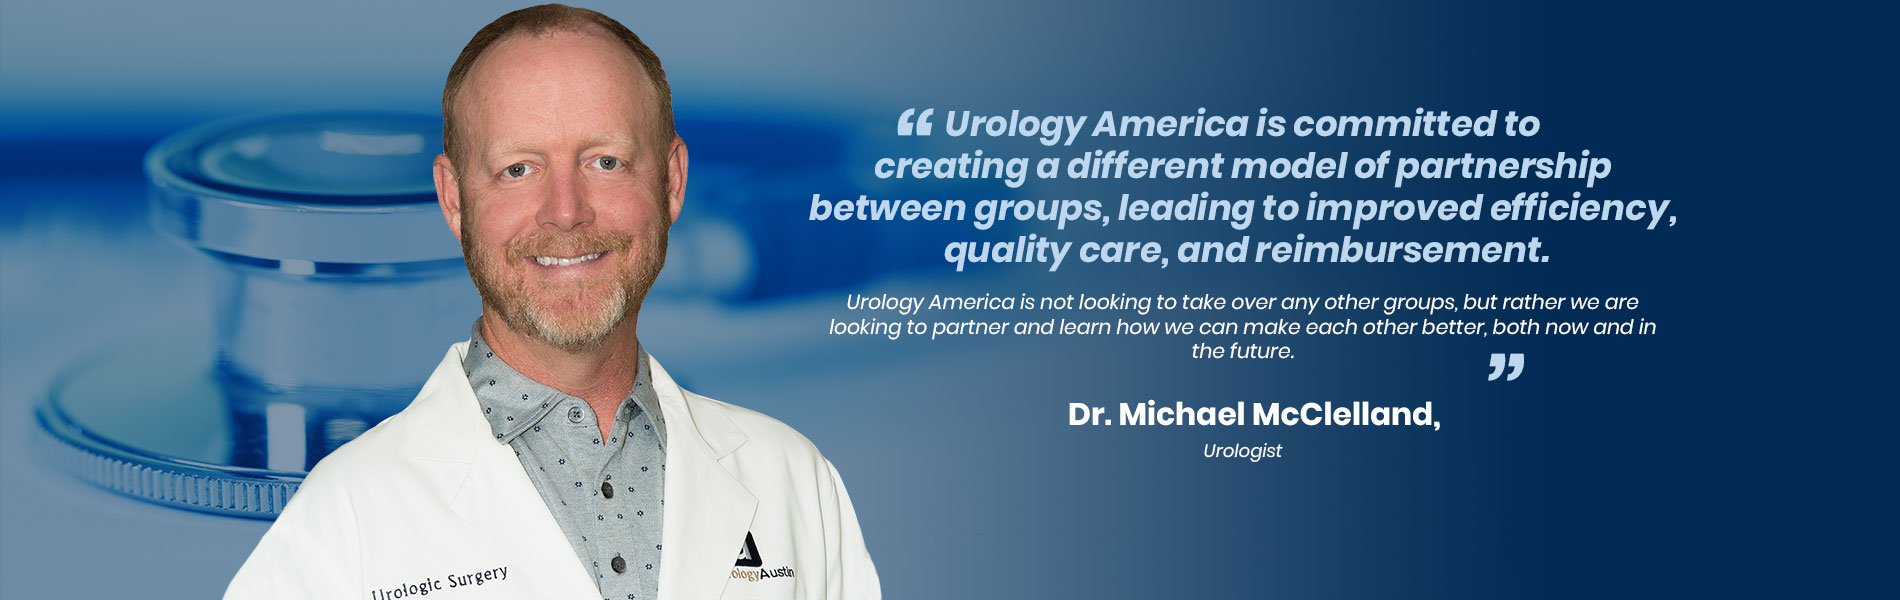 “Urology America is committed to creating a different model of partnership between groups, leading to improved efficiency, quality care, and reimbursement. Urology America is not looking to take over any other groups, but rather we are looking to partner and learn how we can make each other better, both now and in the future”.